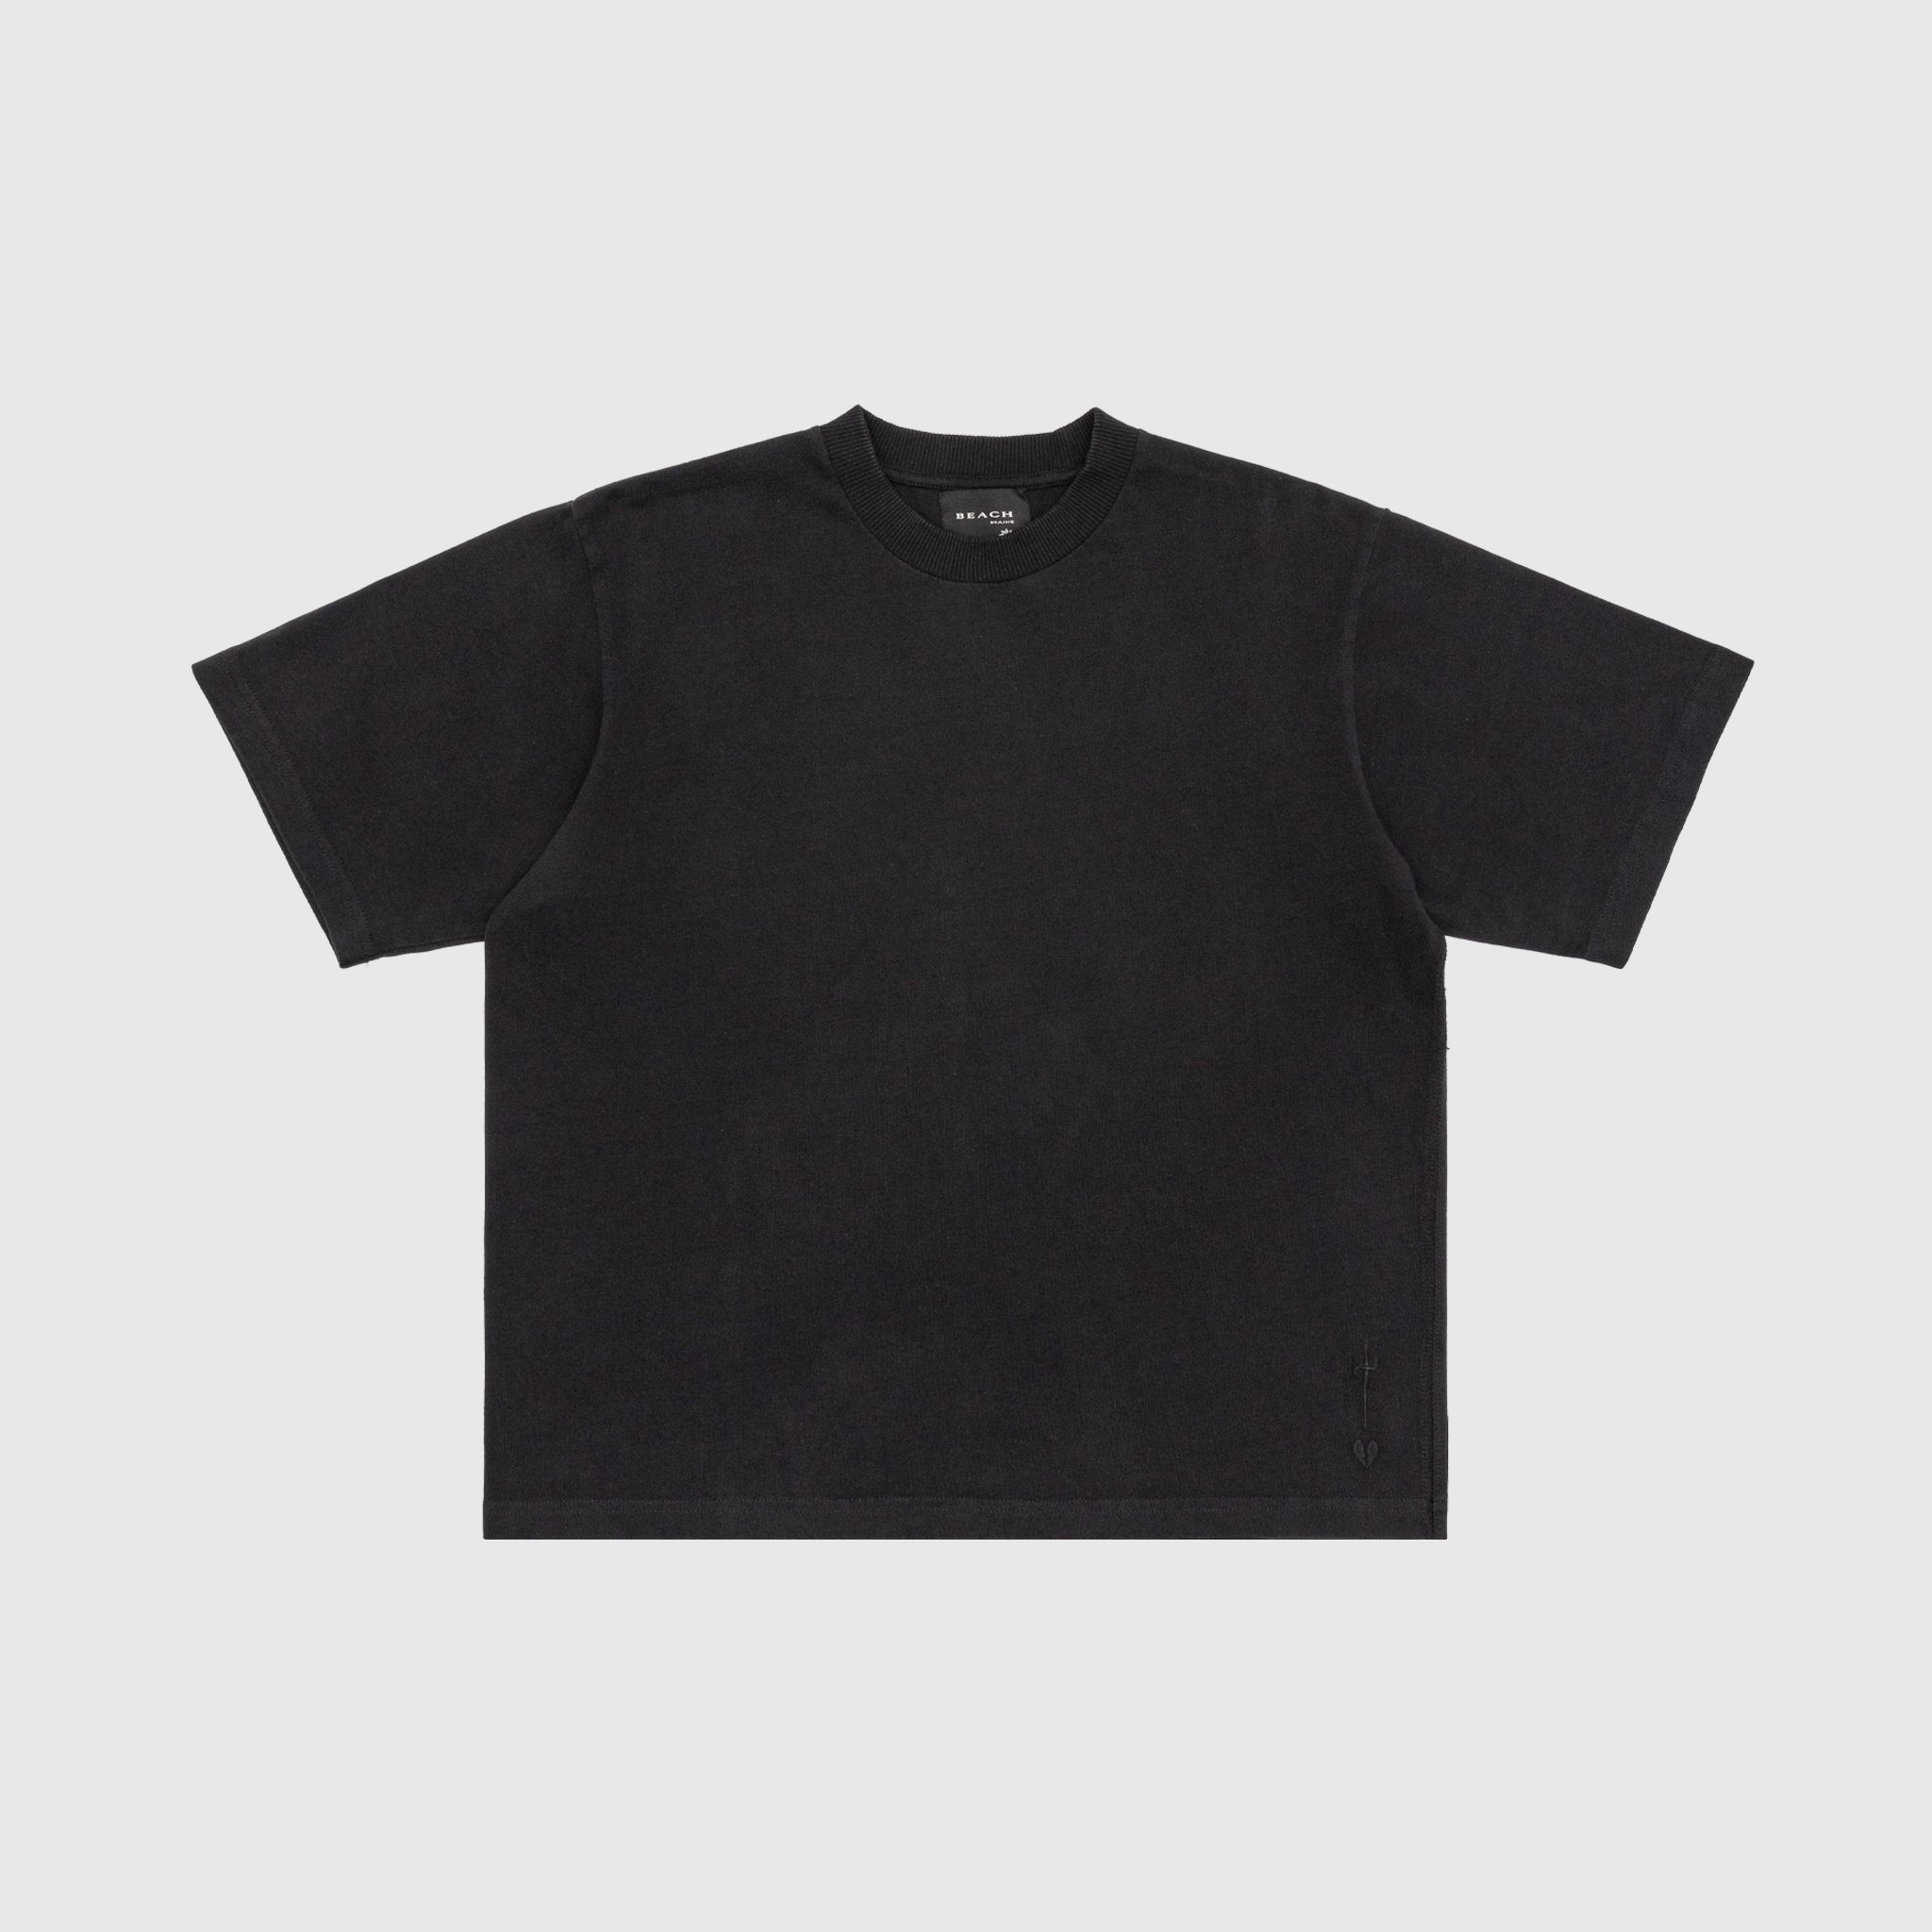 BOXY S/S T-SHIRT – PACKER SHOES